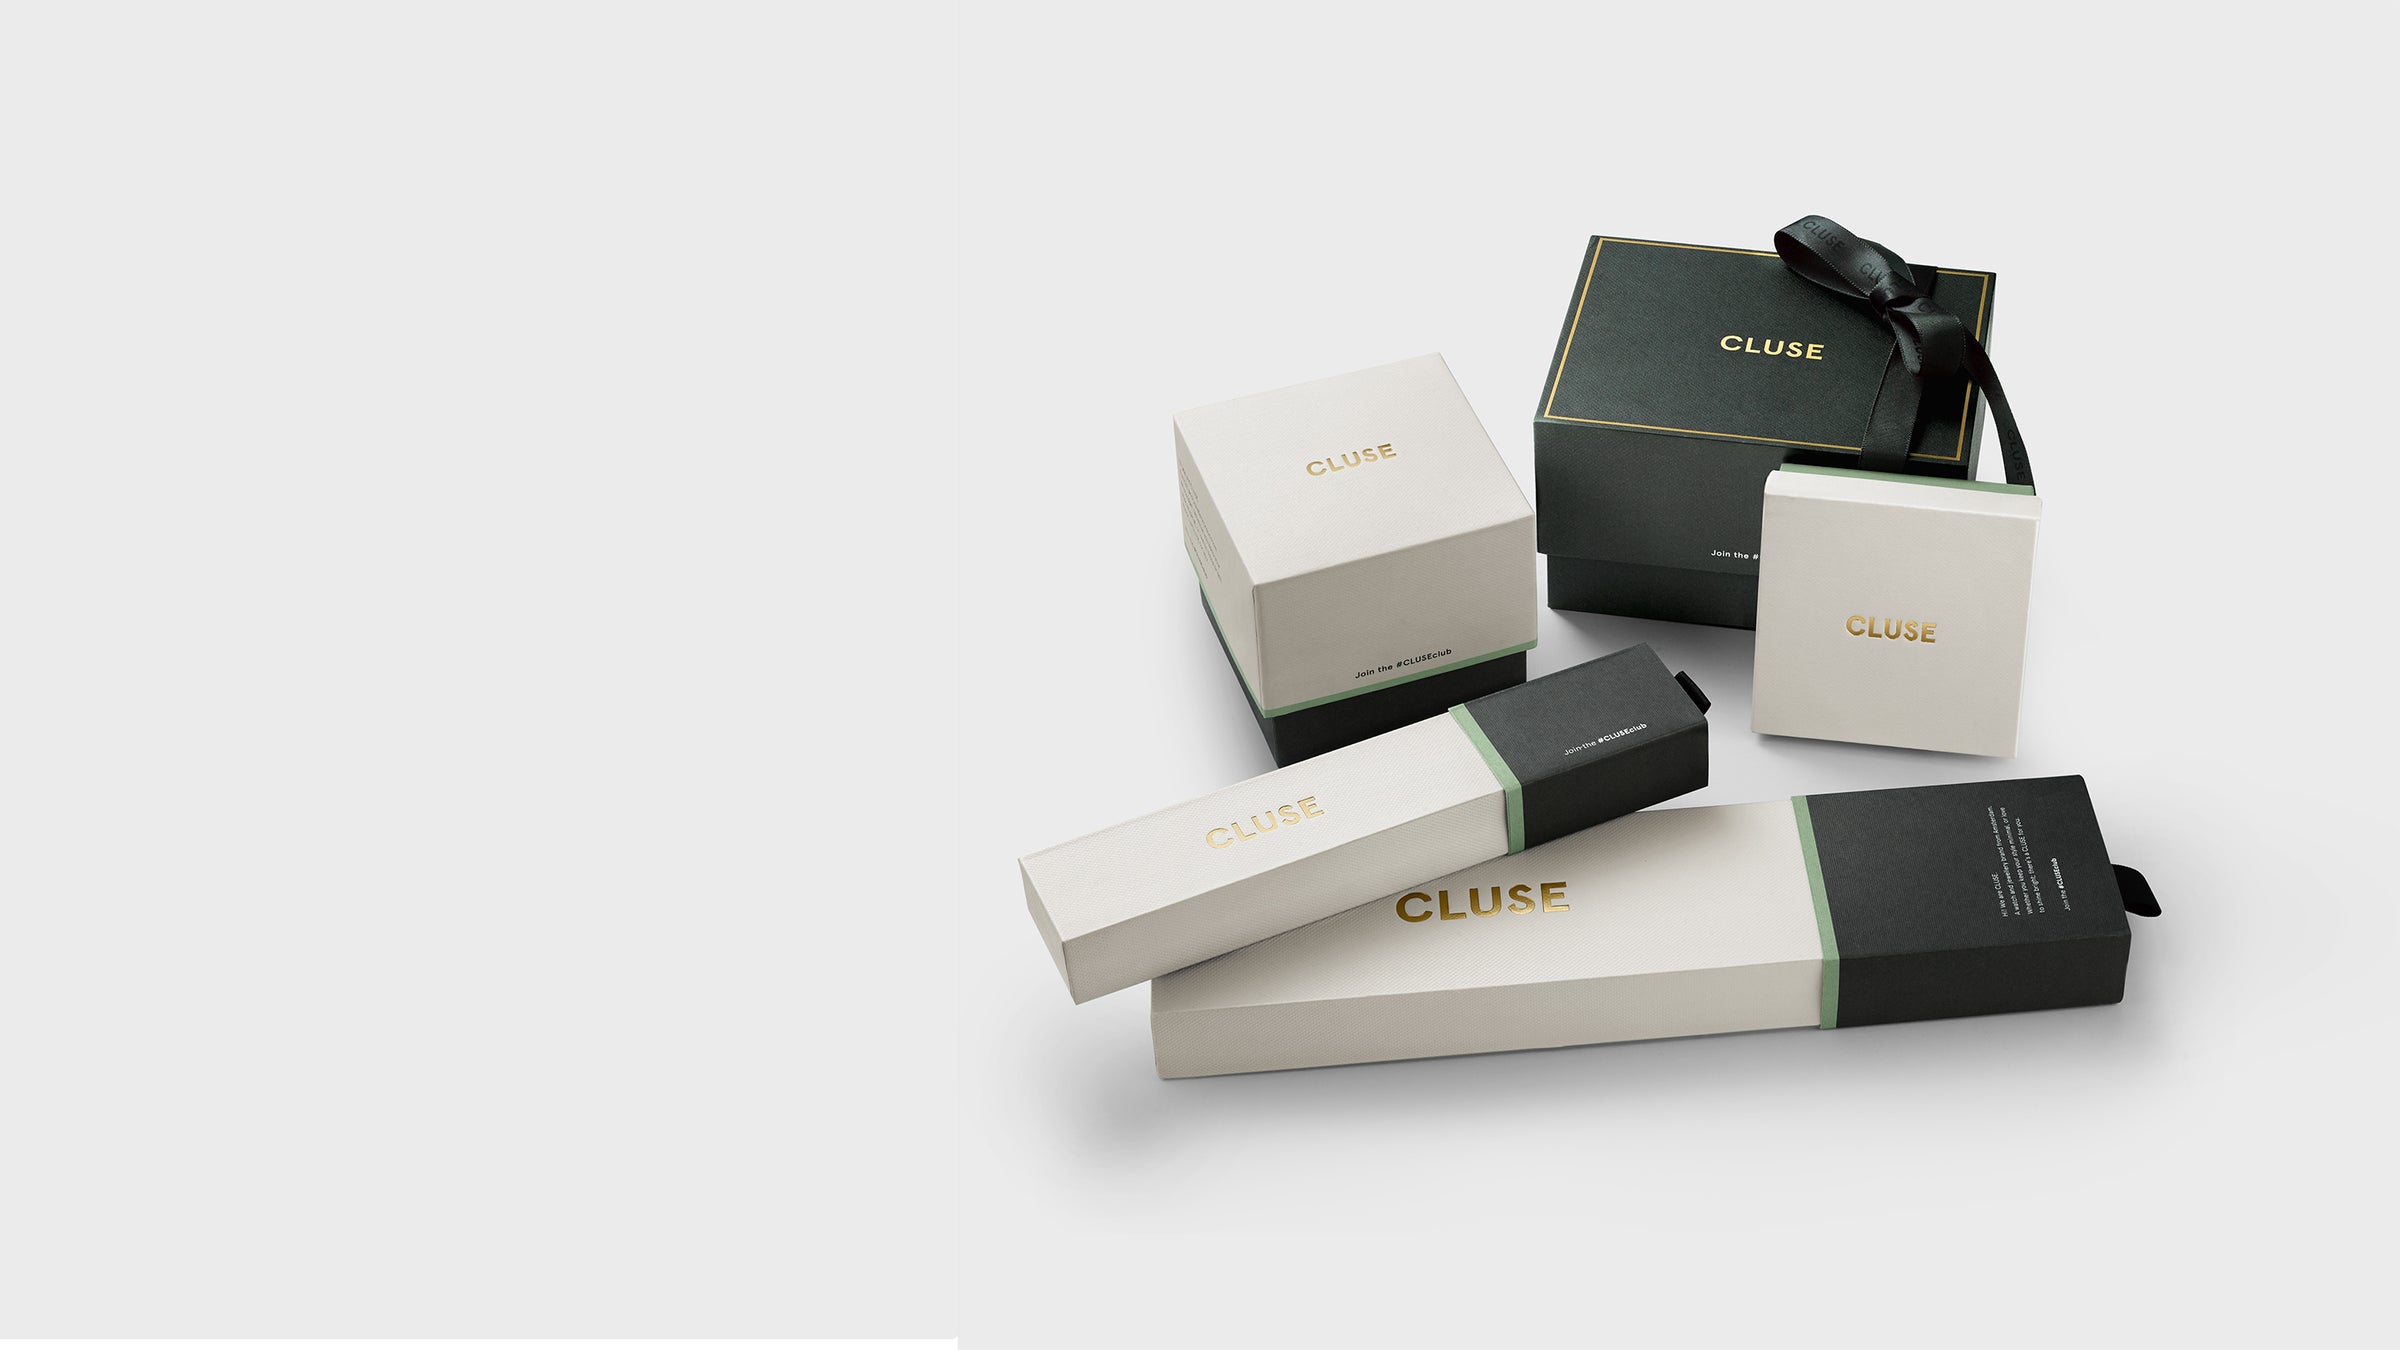 CLUSE product packaging